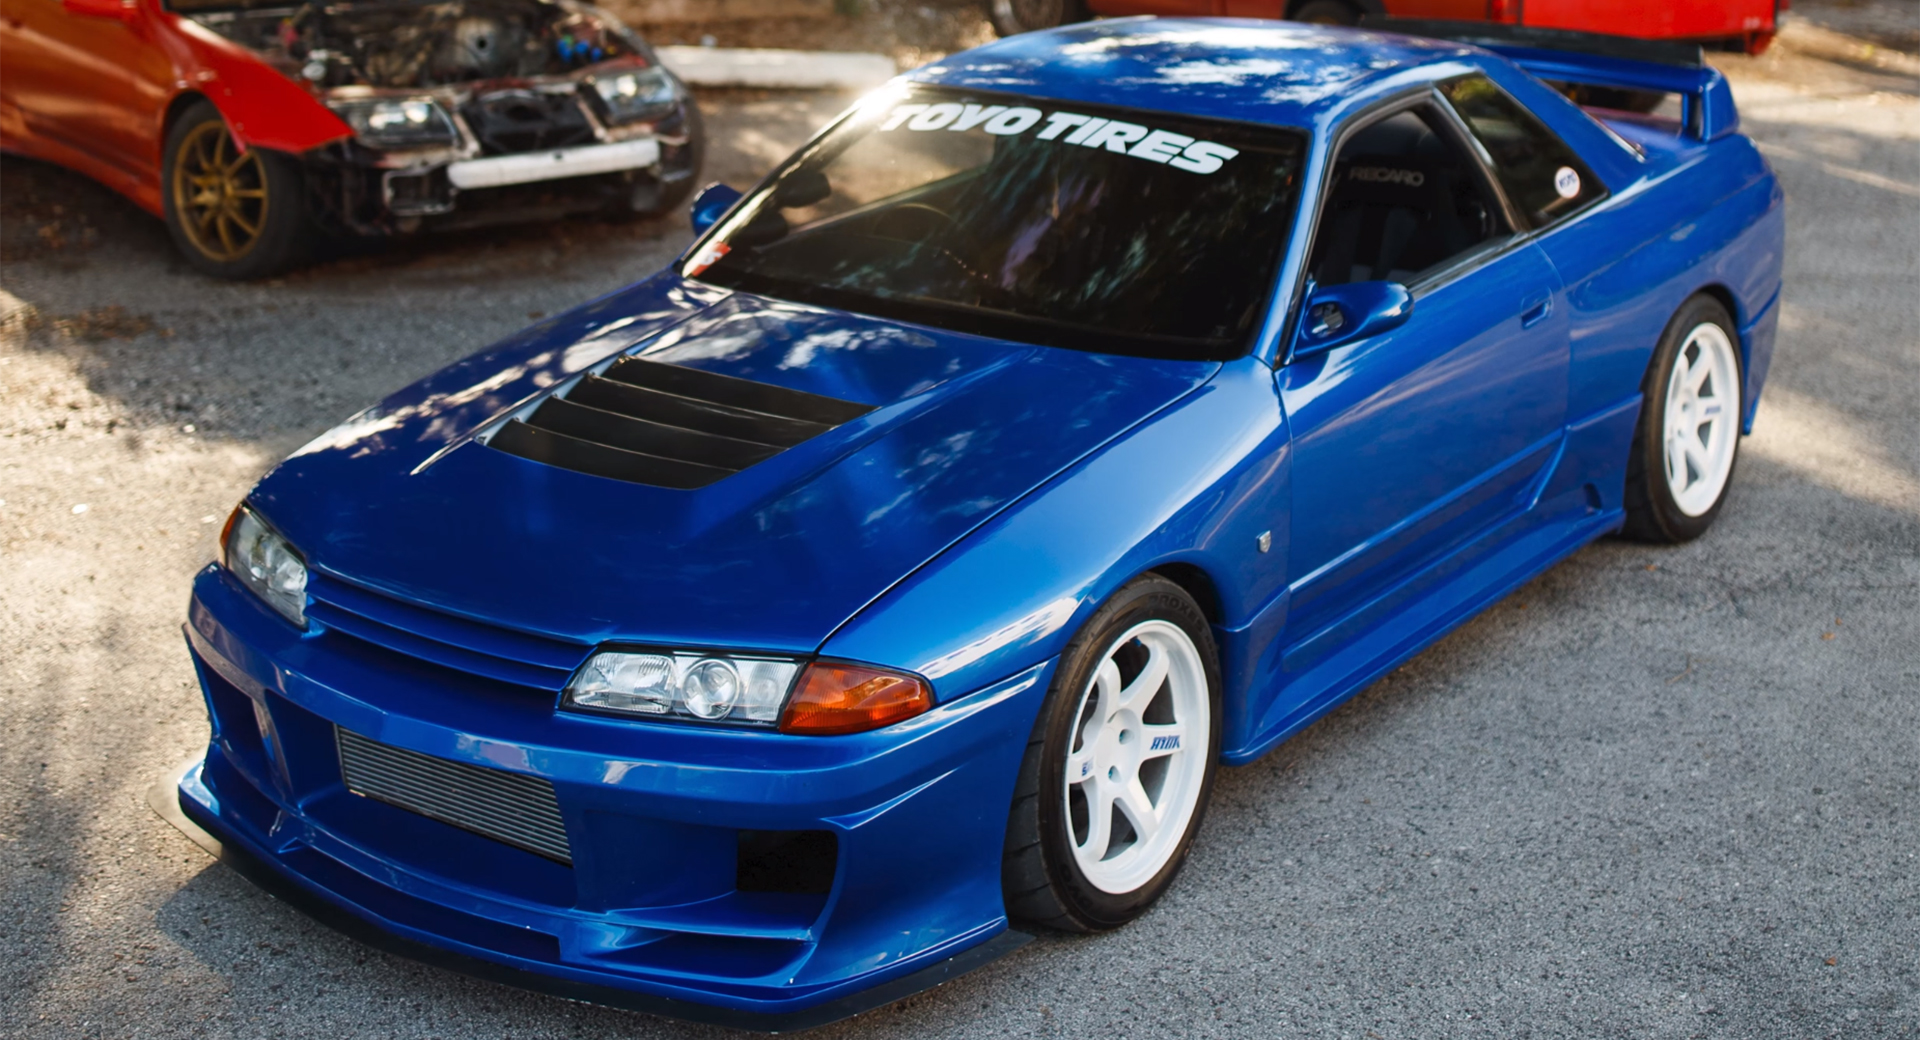 Tuned Bayside Blue Nissan R32 Gt R Puts Out 550 Whp Carscoops